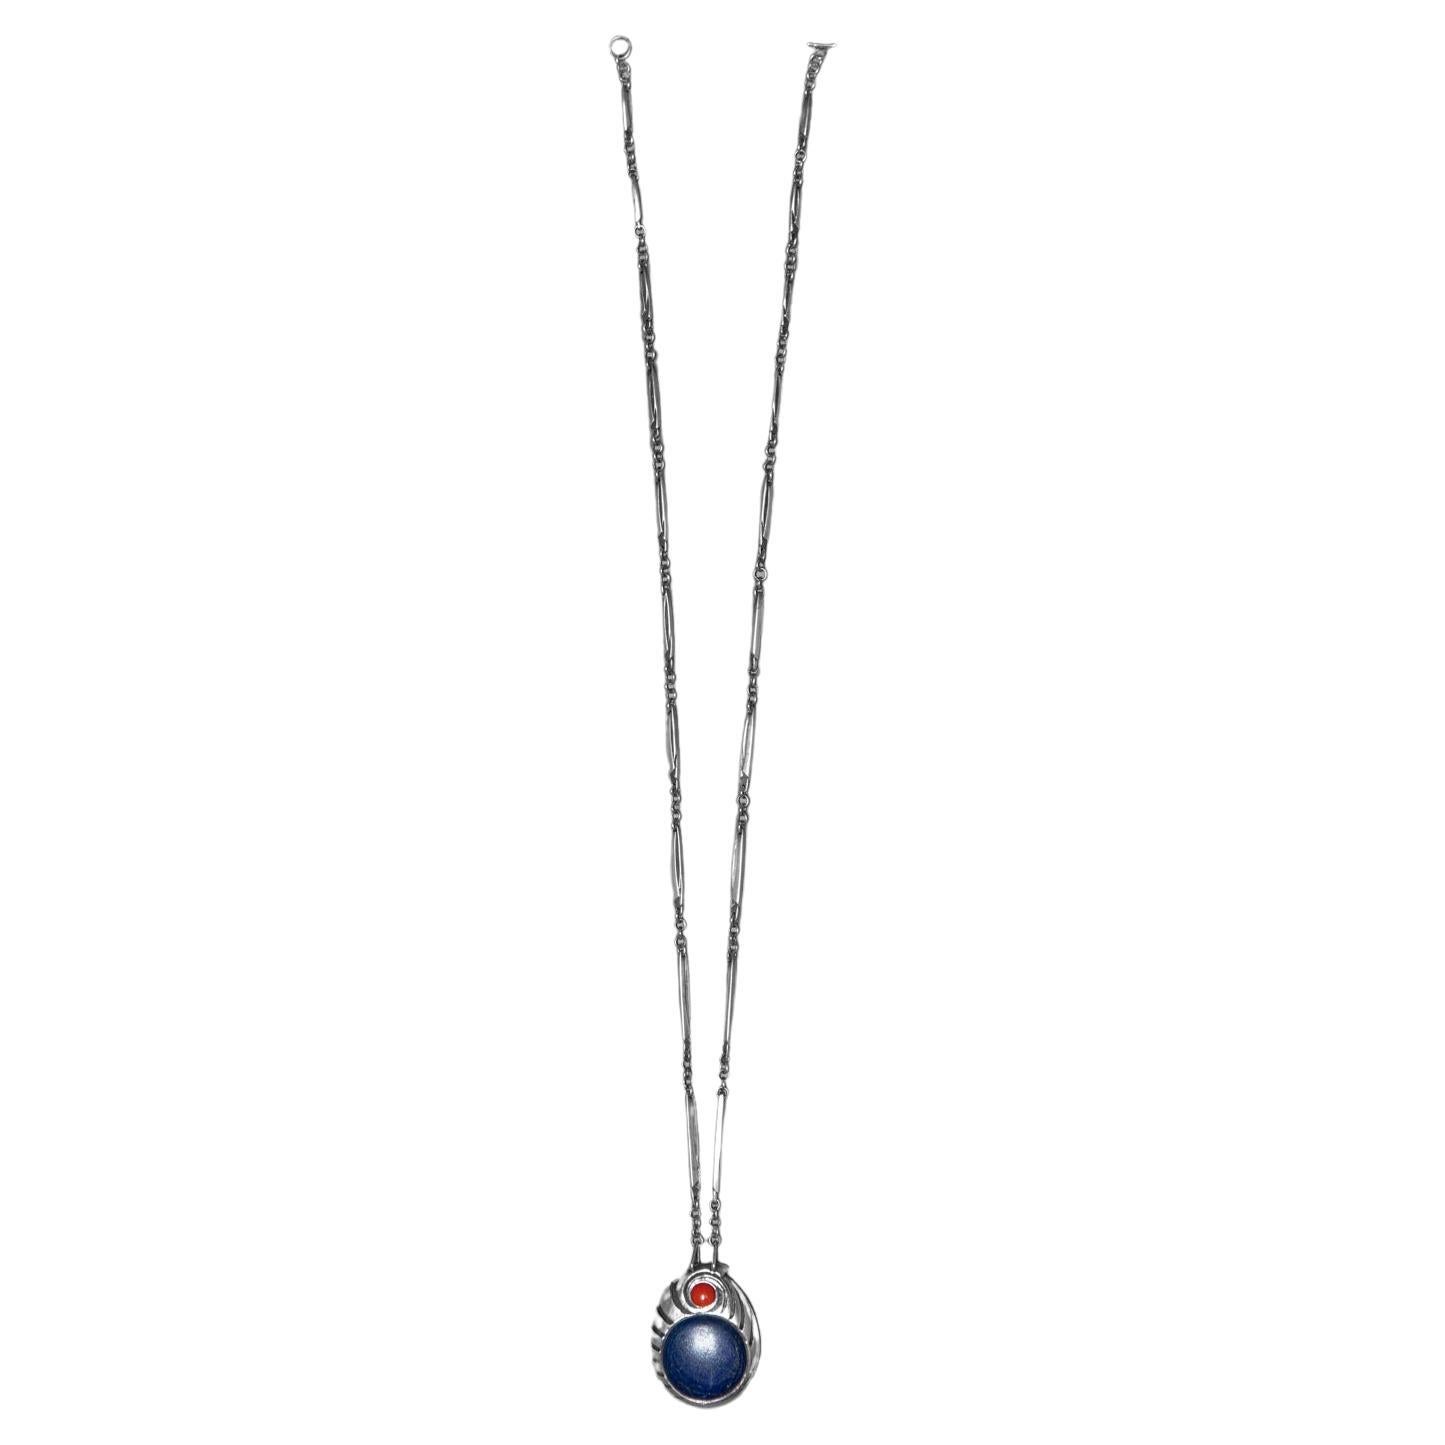 Extremely rare combination pendant attached to custom-made chain by Harry Bertoia in sterling silver, containing one Lapis Lazuli and one Coral.  This piece comes from a private collection. Provenance will accompany the piece. The work has been